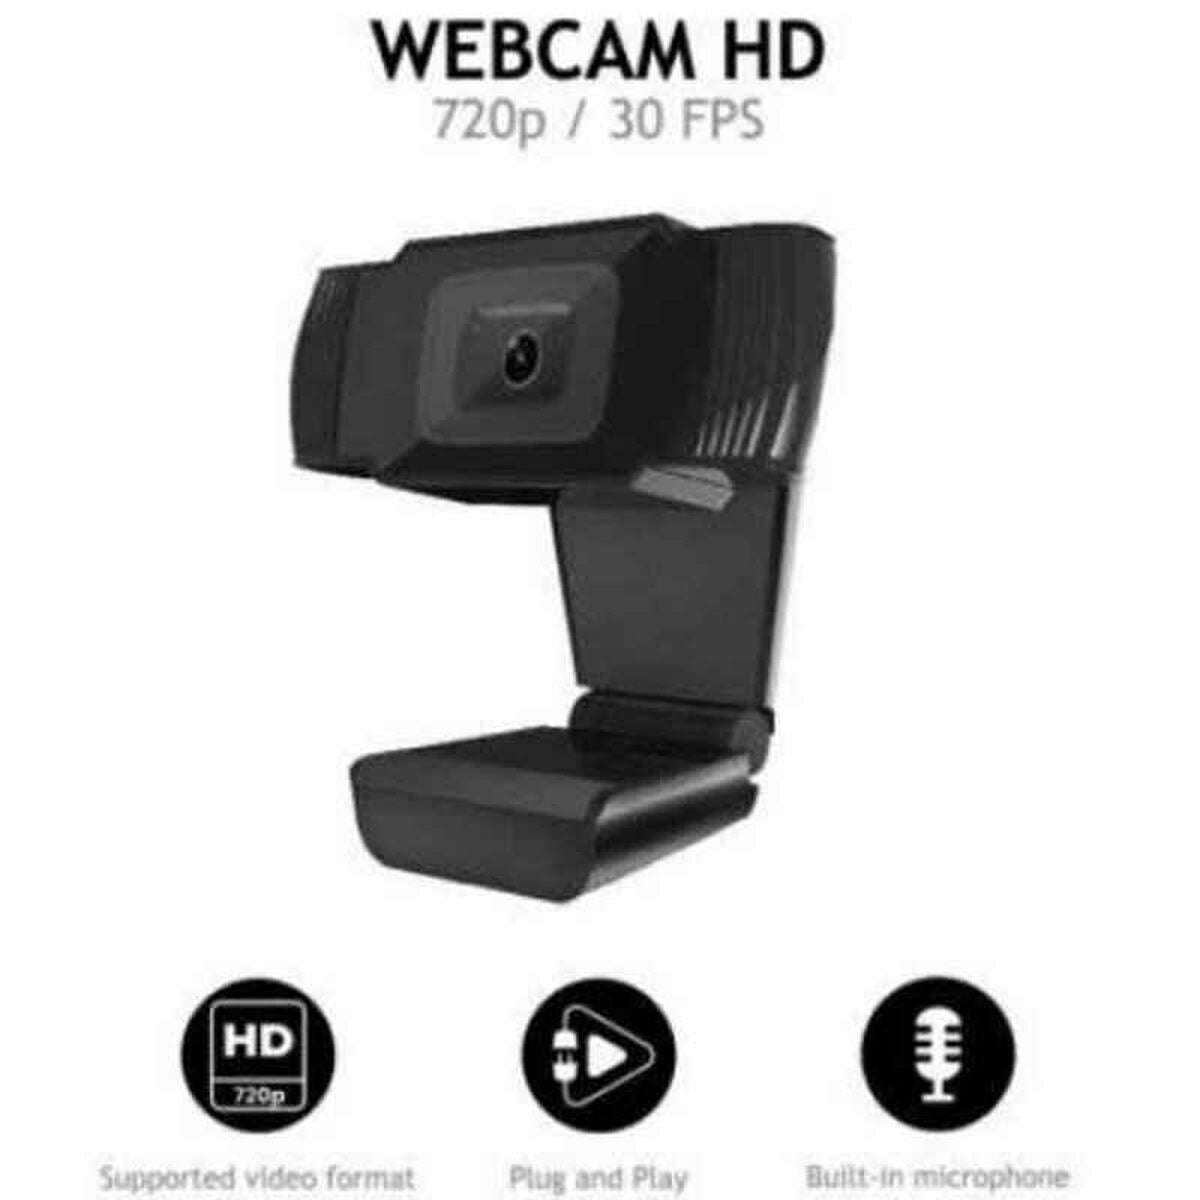 Webcam Nilox NXWC02 HD 720P Full HD Black, Nilox, Computing, Accessories, webcam-nilox-nxwc02-hd-720p-full-hd-black, Brand_Nilox, category-reference-2609, category-reference-2642, category-reference-2844, category-reference-t-19685, category-reference-t-19908, category-reference-t-21340, category-reference-t-25568, computers / peripherals, Condition_NEW, office, Price_20 - 50, Teleworking, RiotNook